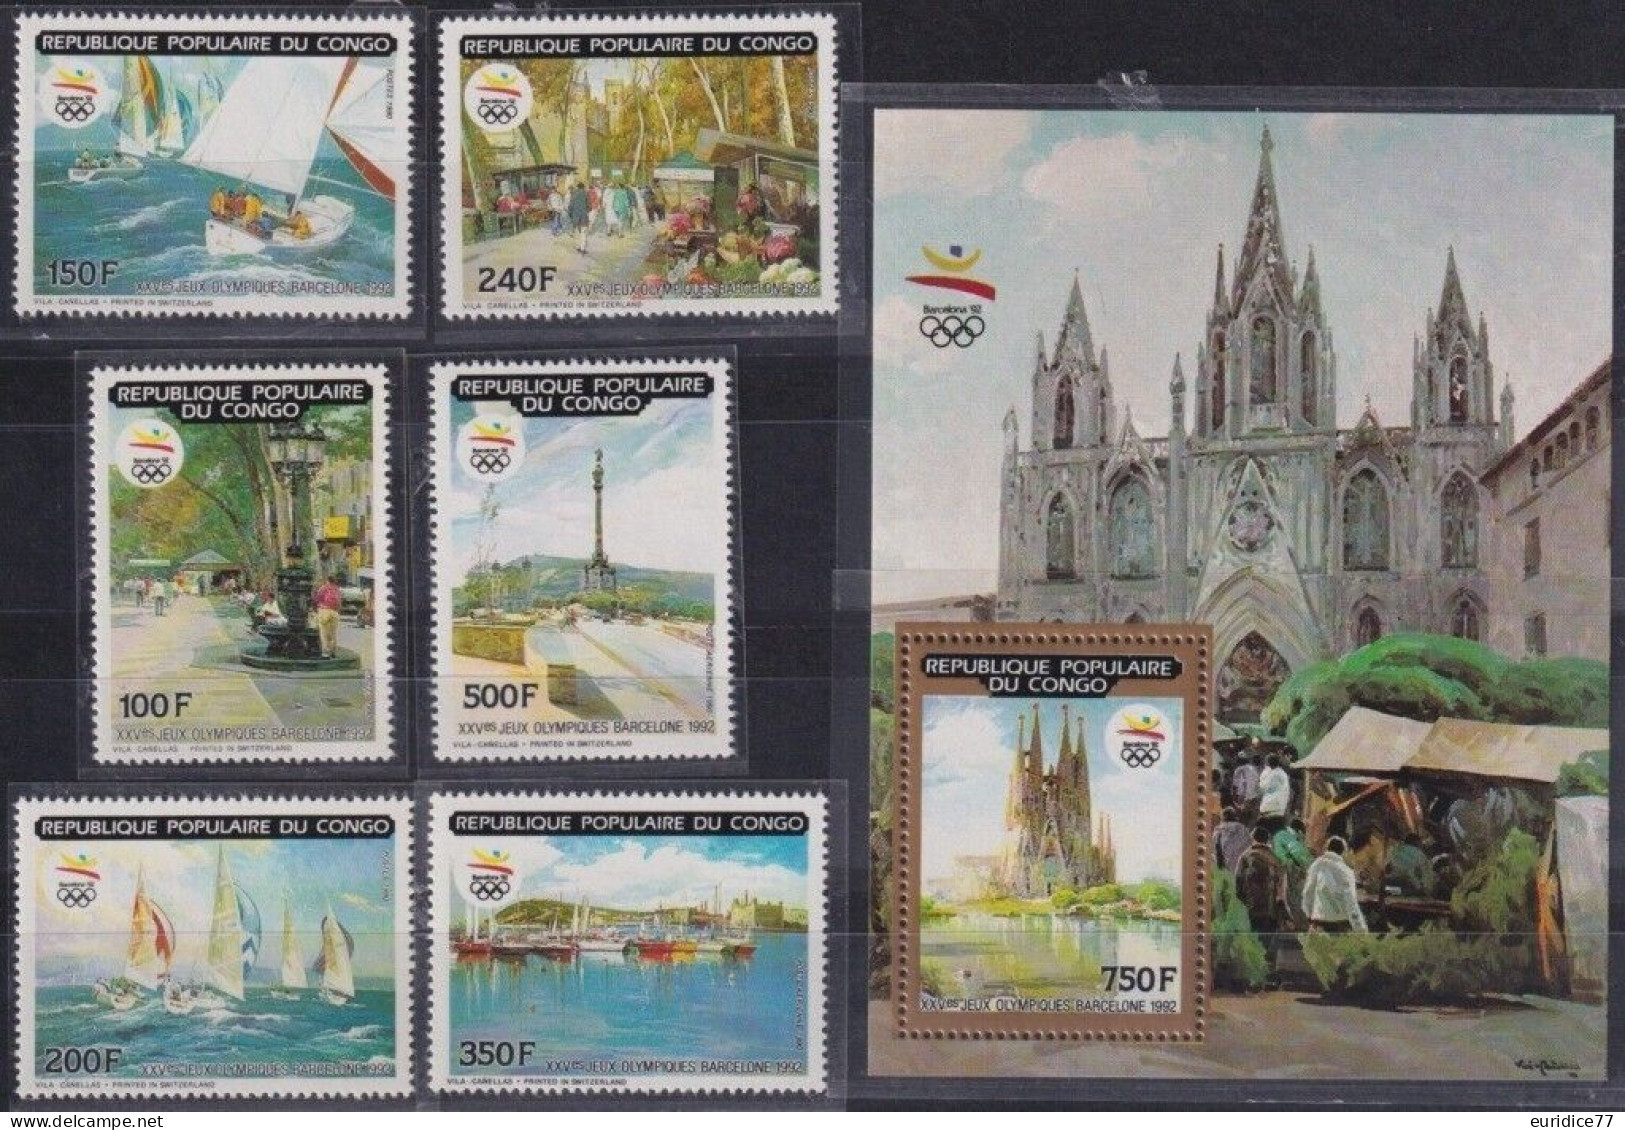 Congo Rep. Popular 1990 - Olympic Games Barcelona 92 Mnh** - Ete 1992: Barcelone